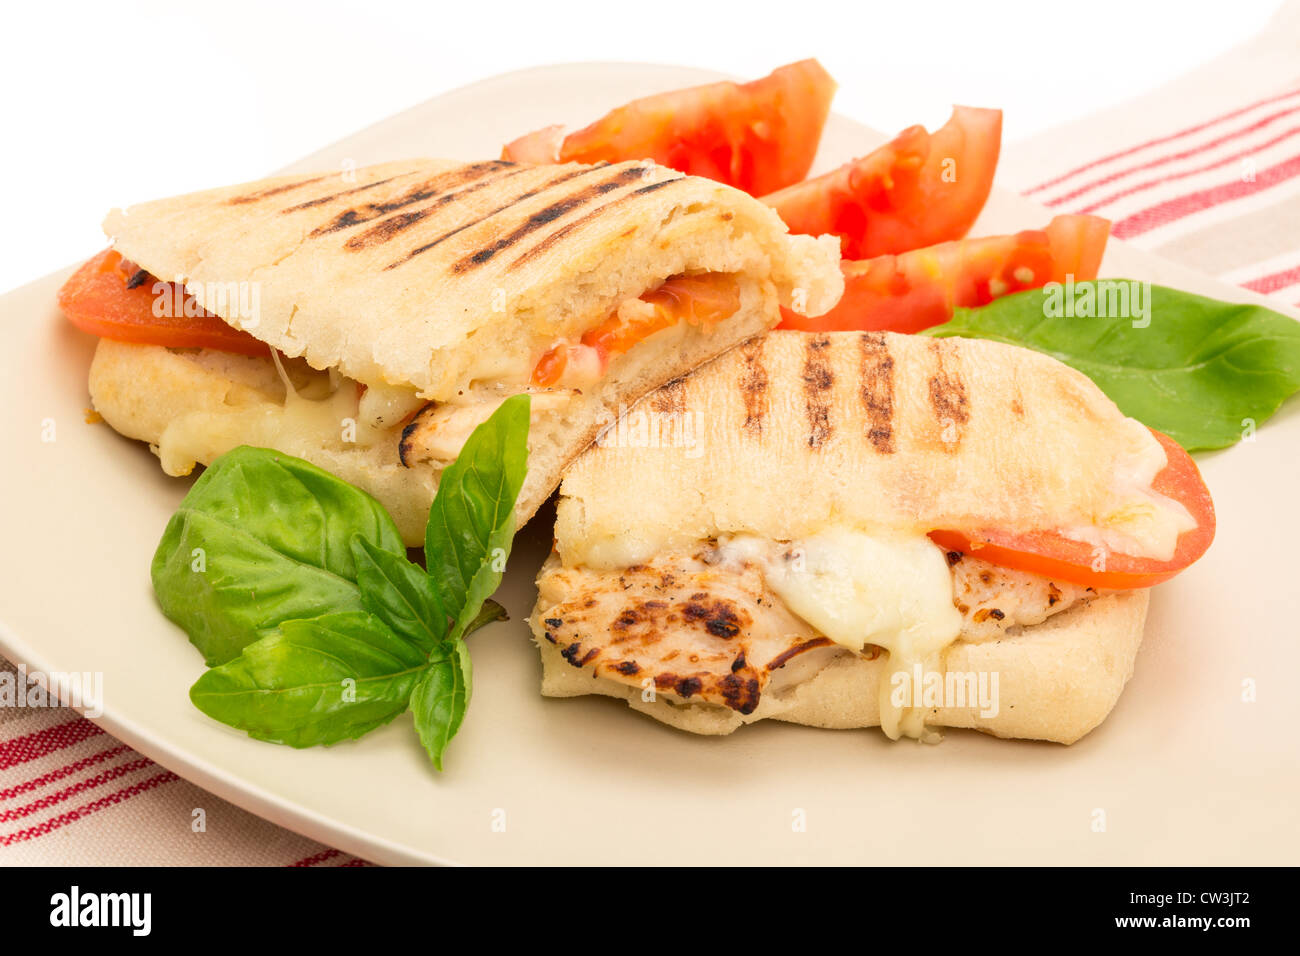 Toasted Chicken, tomato and mozzarella Panini sandwich that has been cut in half and placed on a plate - studio shot Stock Photo